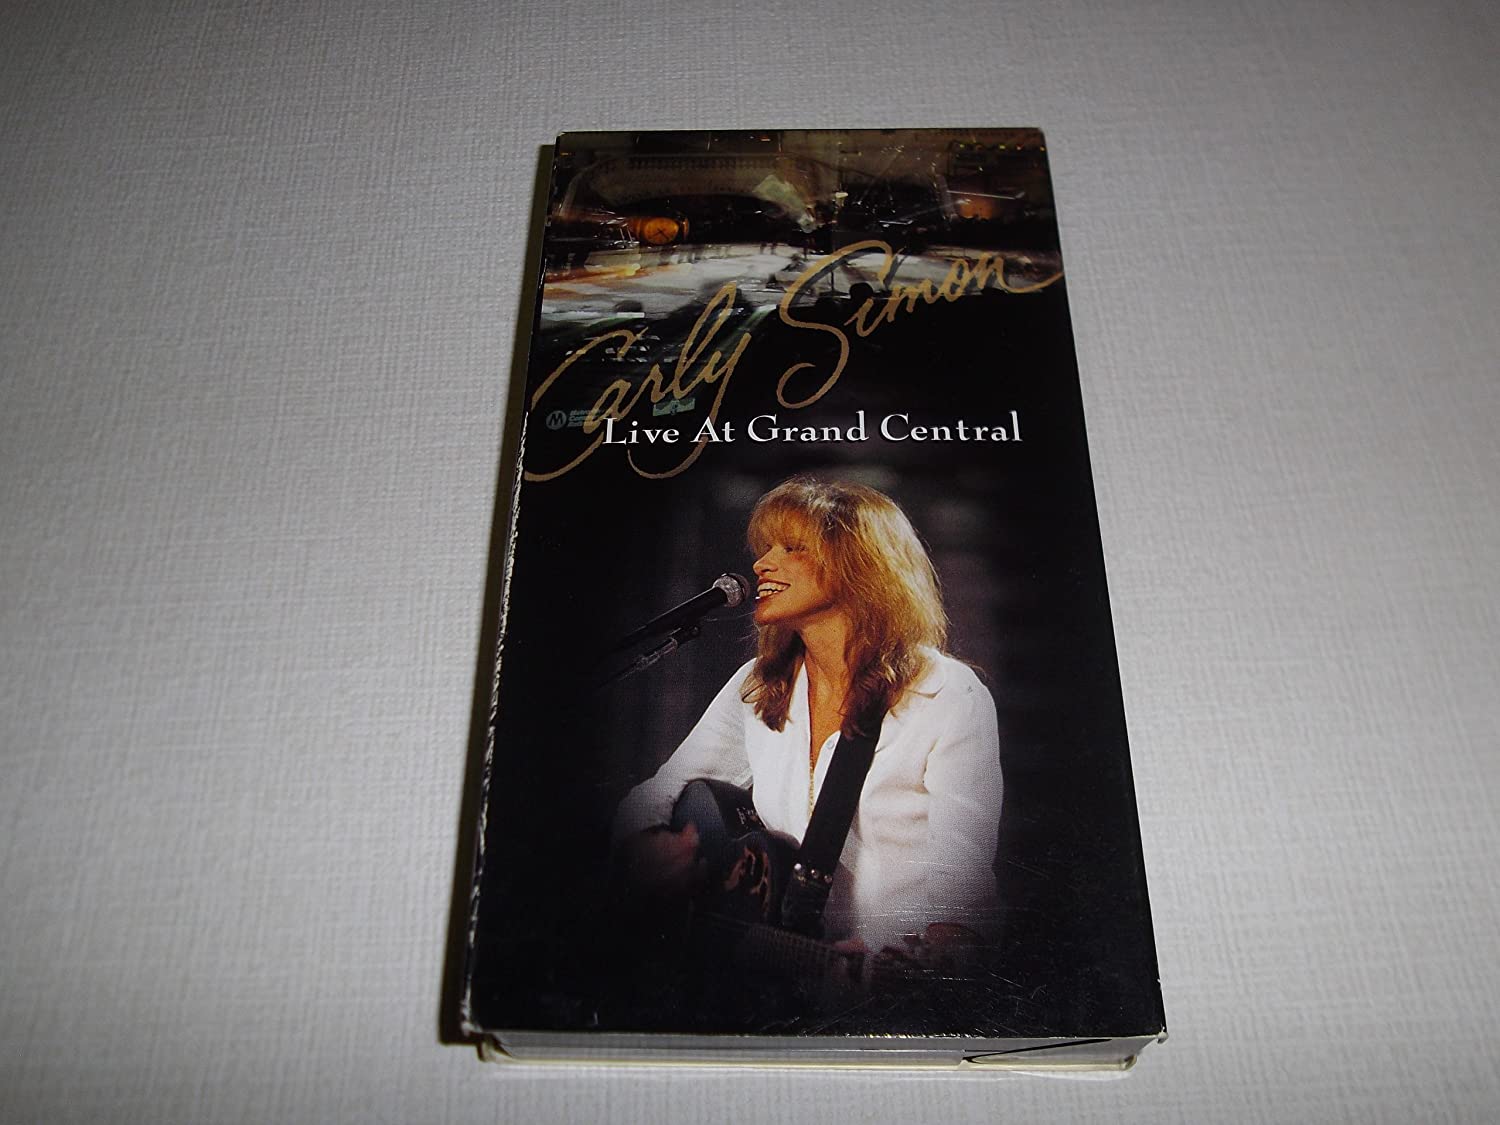 Carly Simon - Live At Grand Central 1995 (2023) BDR 1080.x264.PCM